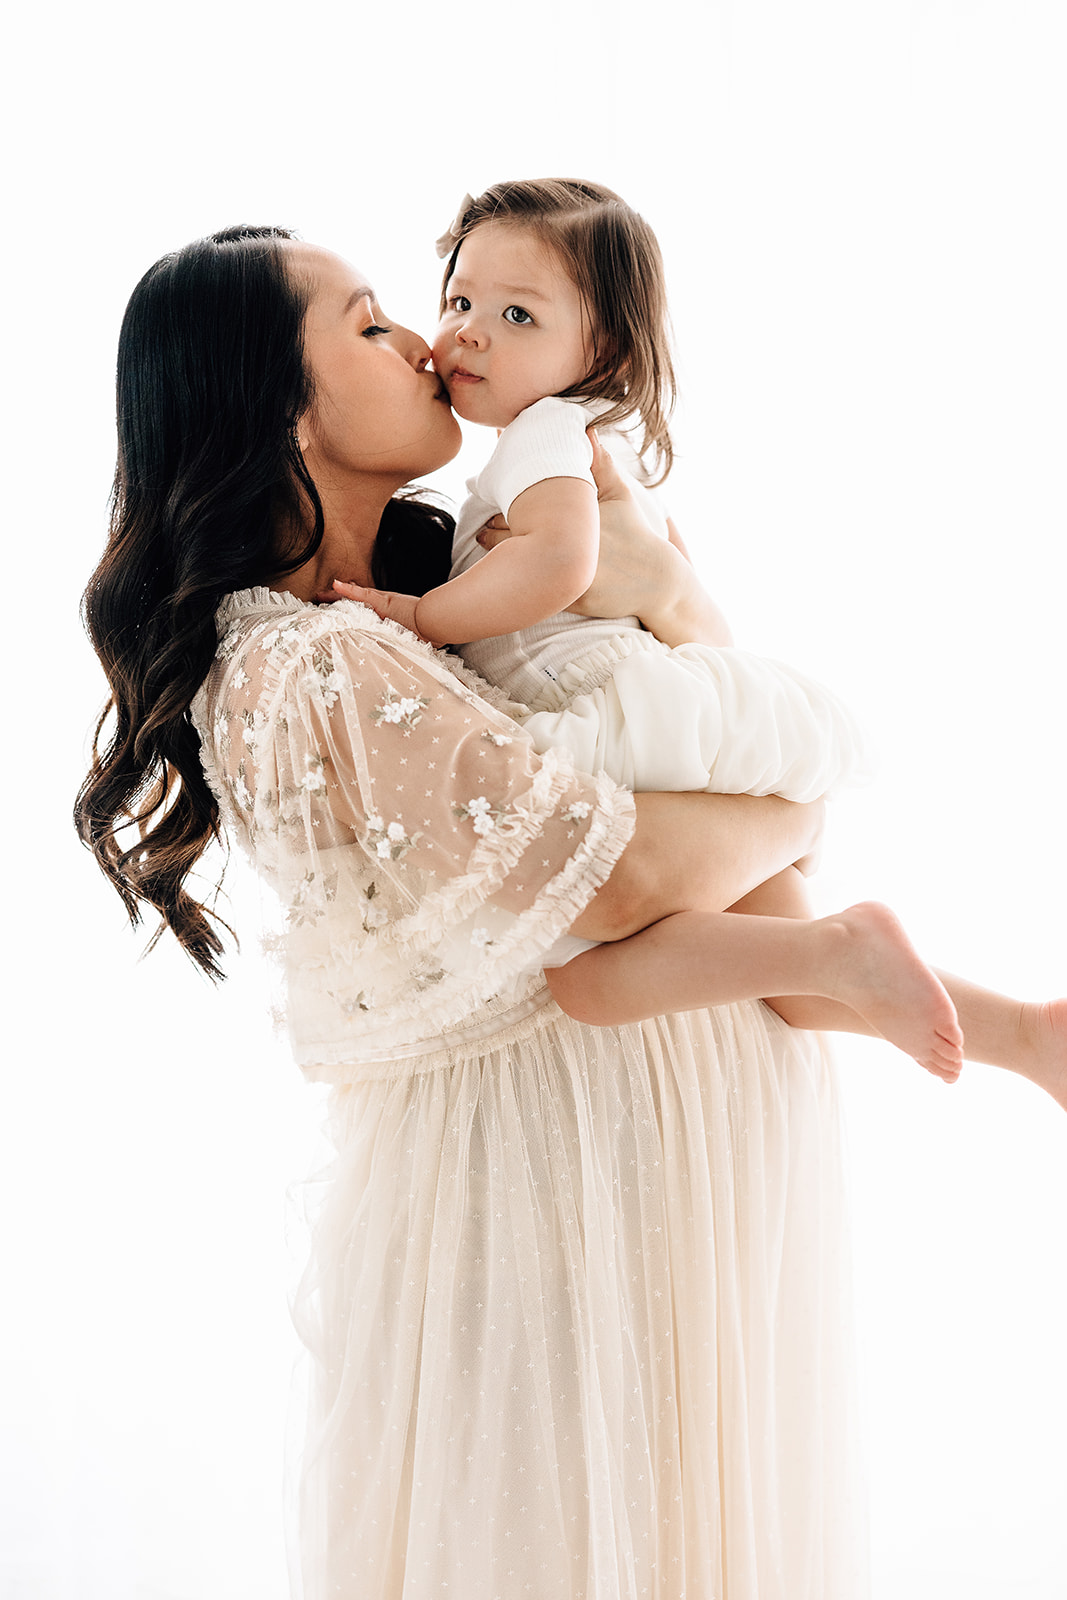 A mother kisses her toddler daughter in a white dress while holding her in a studio